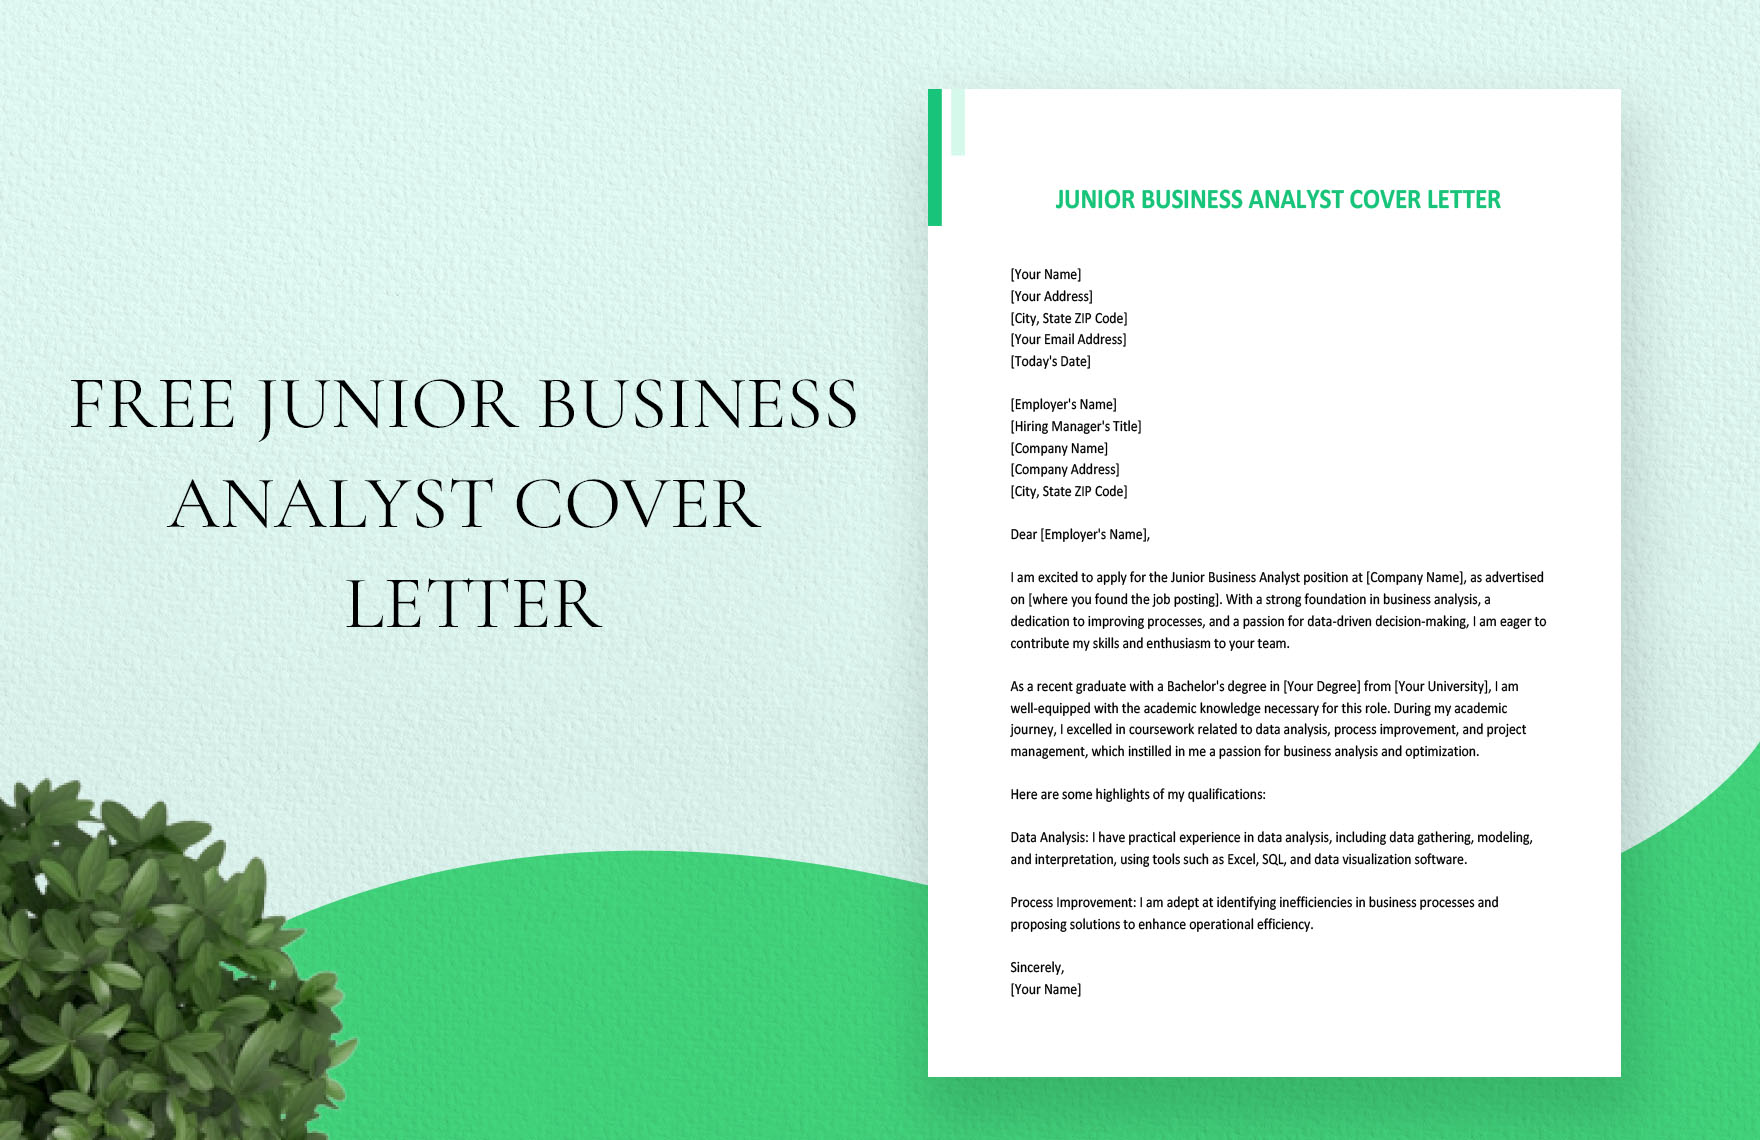 Junior Business Analyst Cover Letter